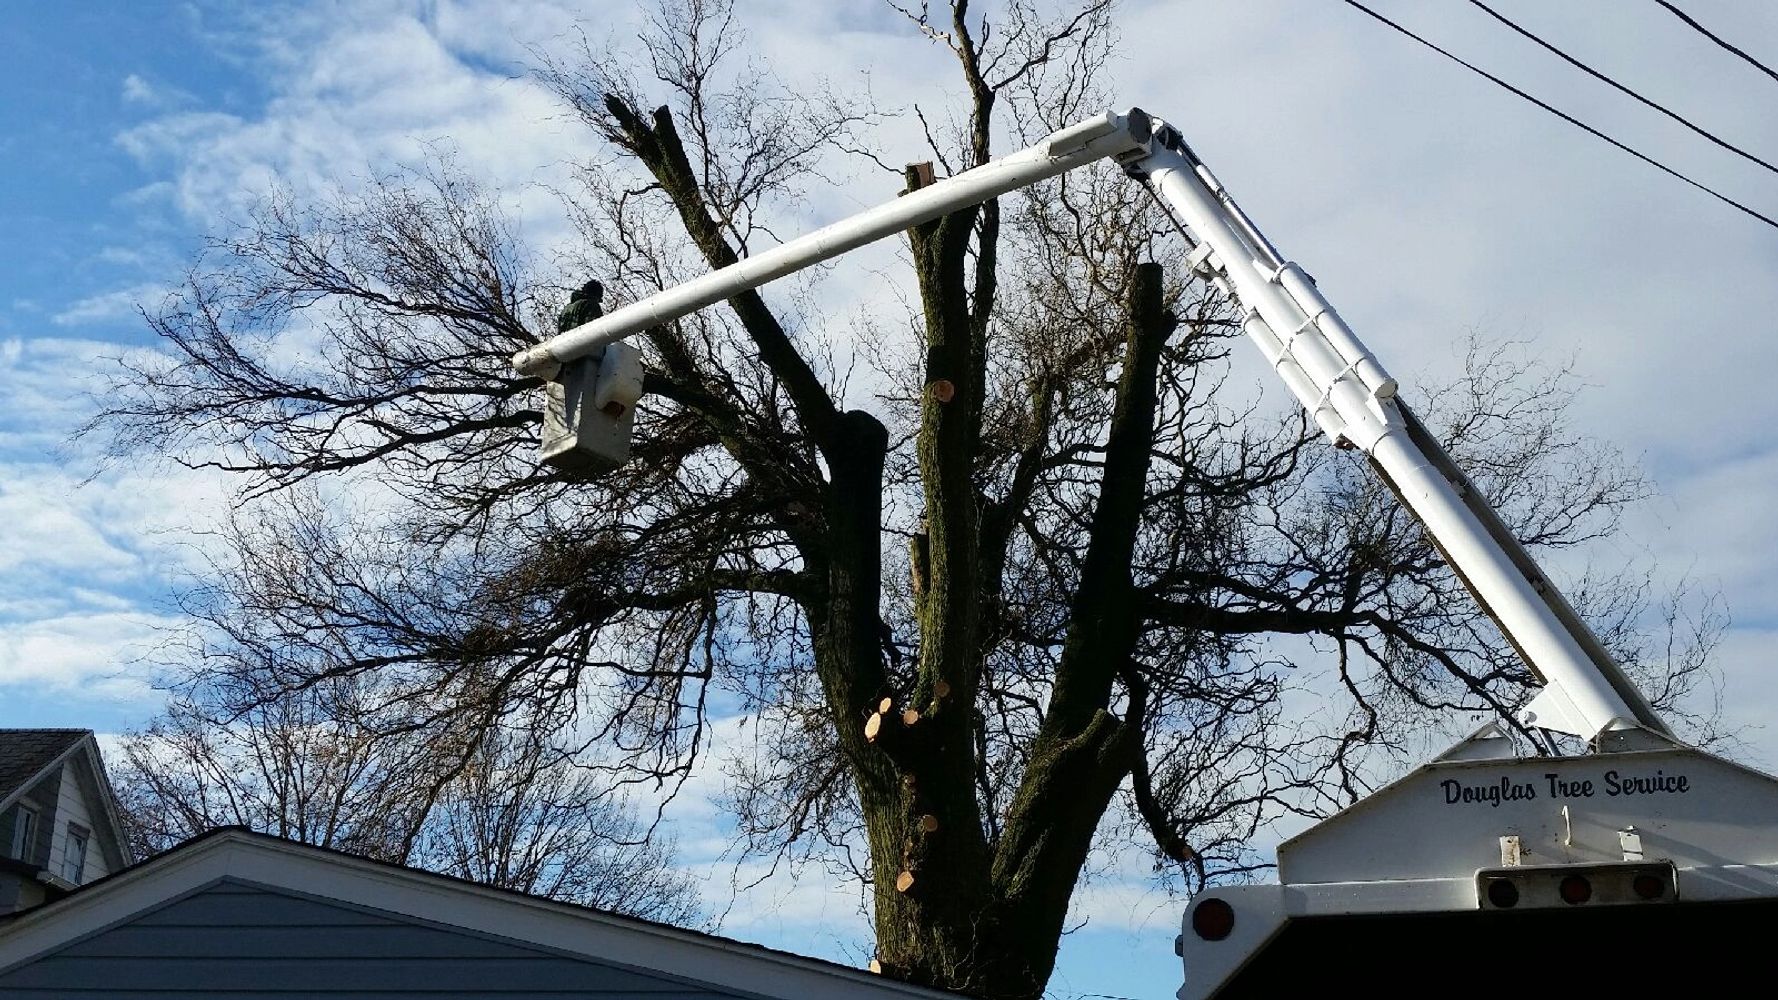 In the heart of Lancaster, PA, Douglas Tree Service skilled professionals trim and care for trees